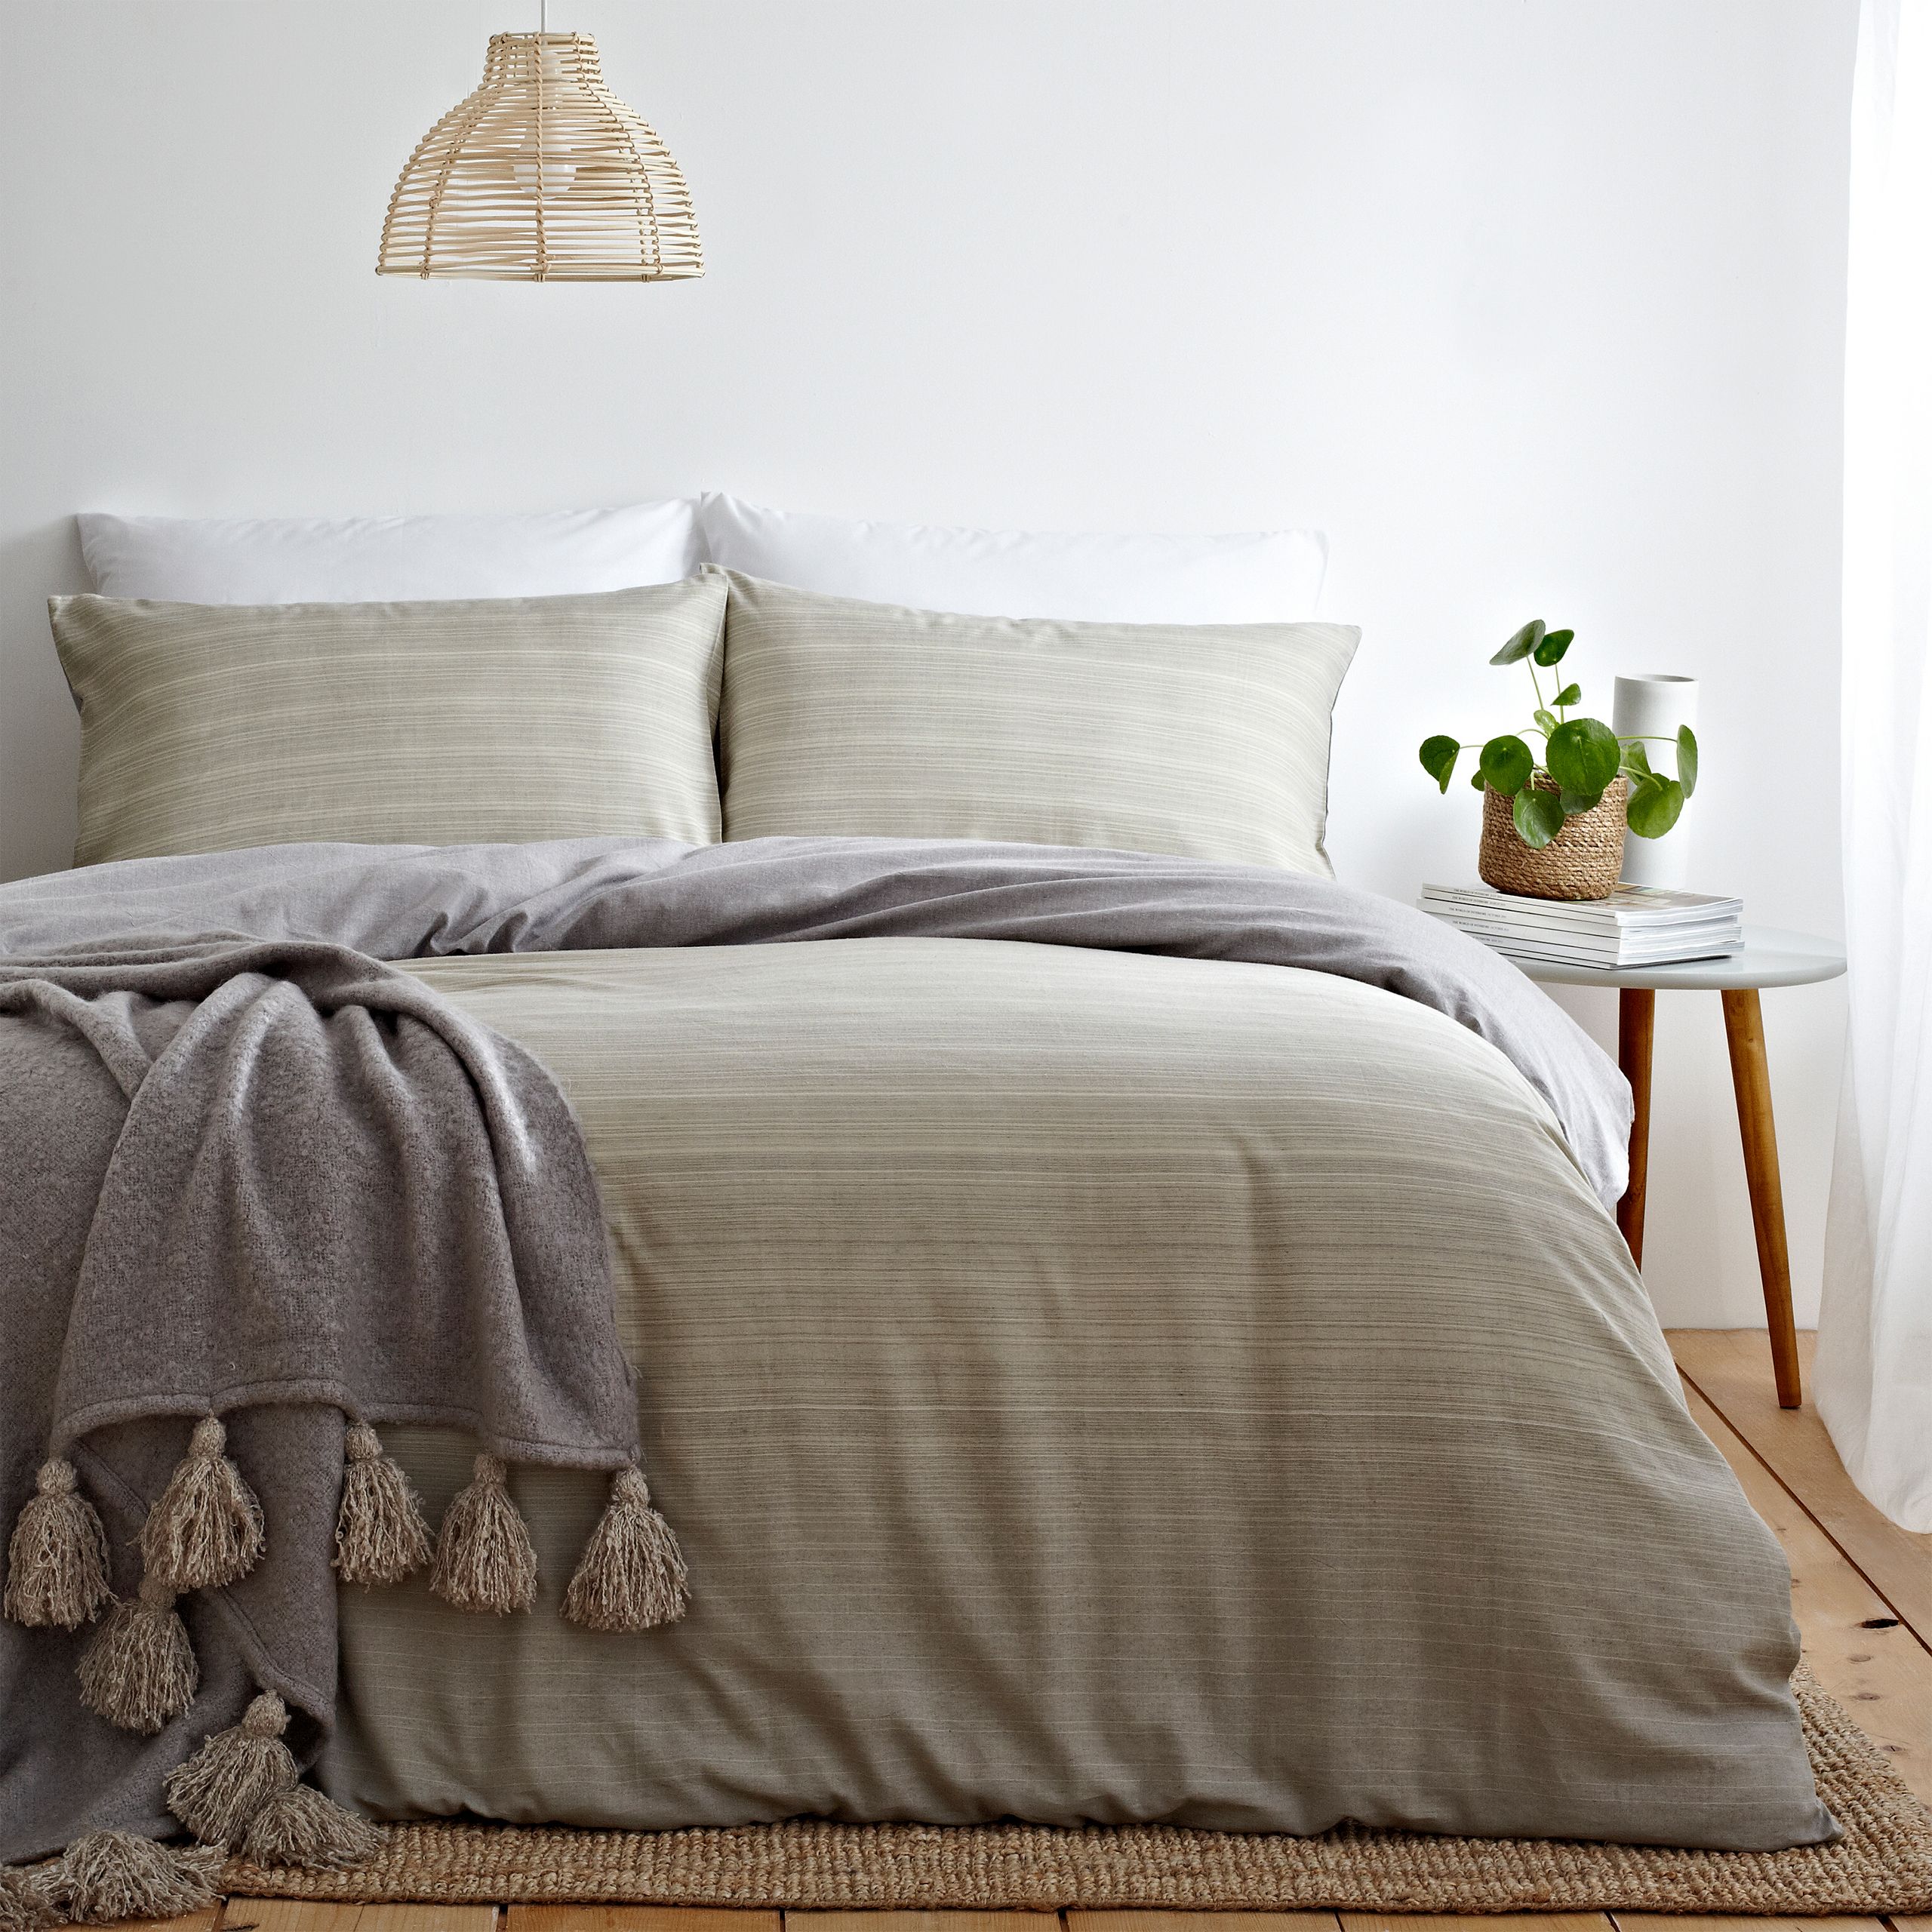 Create a signature look with this perfectly relaxed duvet cover and pillow case set. With soft earthy tones, this design creates a warm and restful mood. The reversible design allows the subtle ombre effect to give a natural textured apperance whilst the chambray grey reverse is ultra versitable for any bedroom.